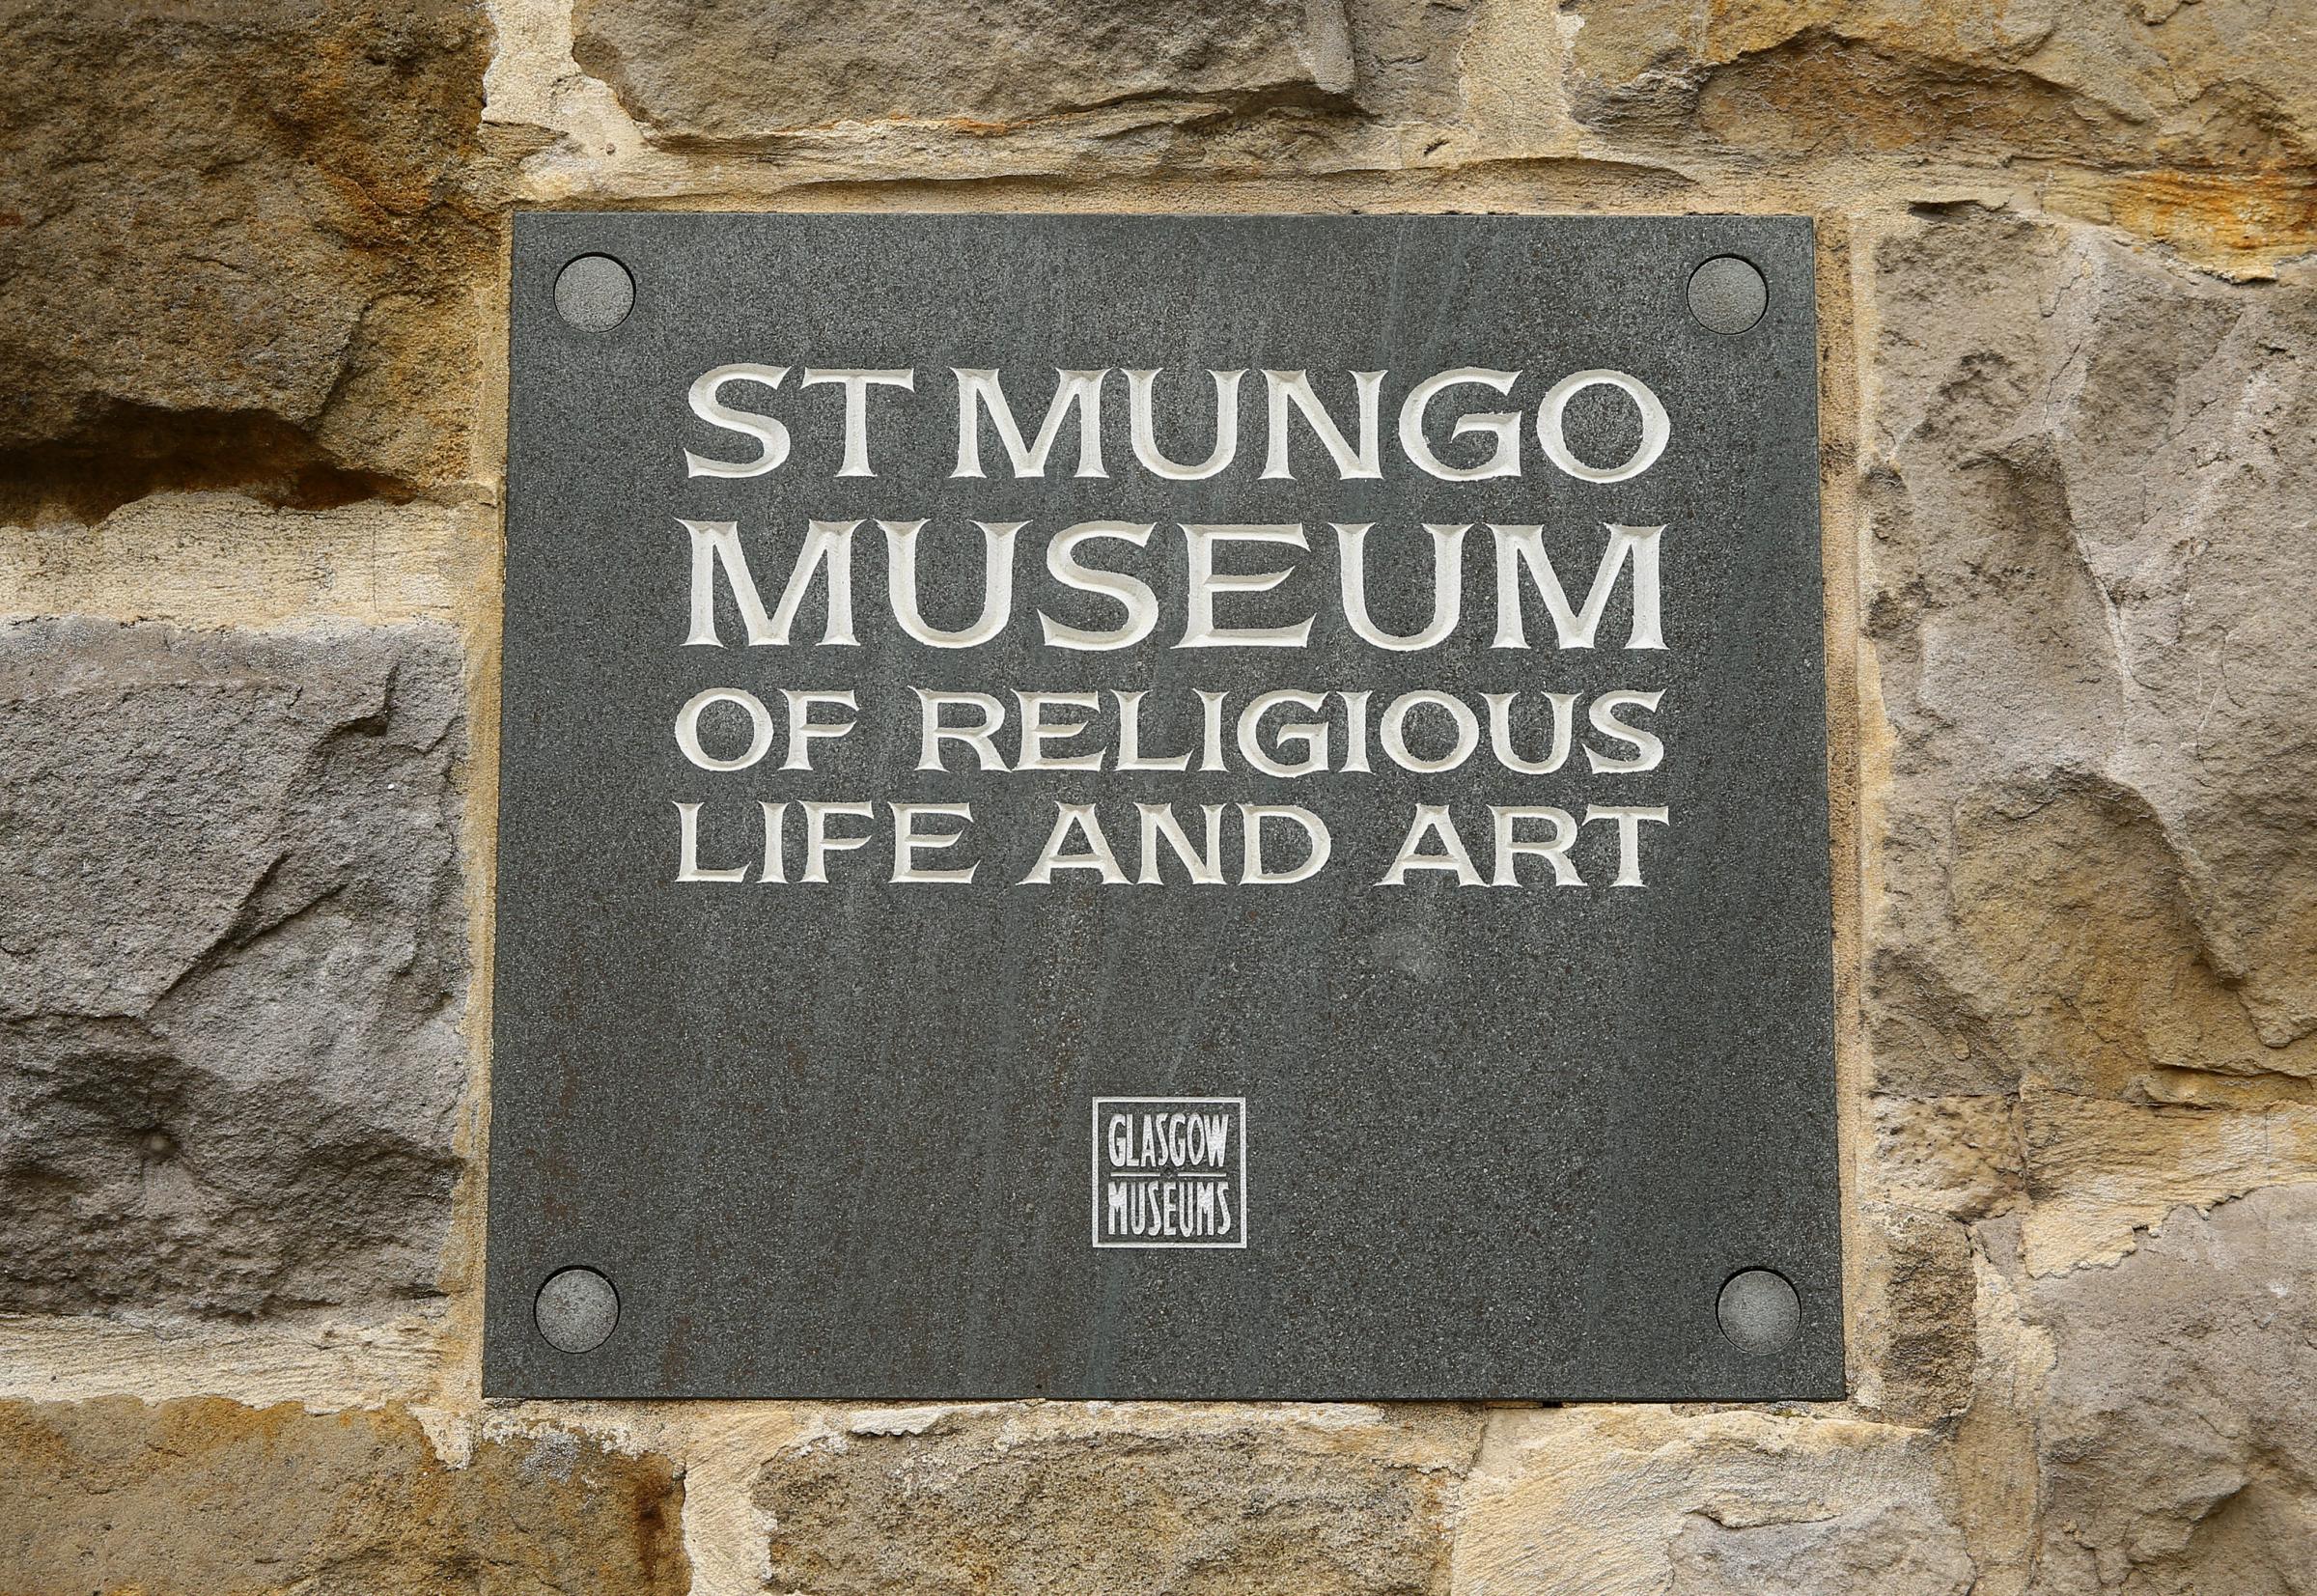 In 2023St Mungo Museum of Religious Life and Art, will mark its 30th anniversary